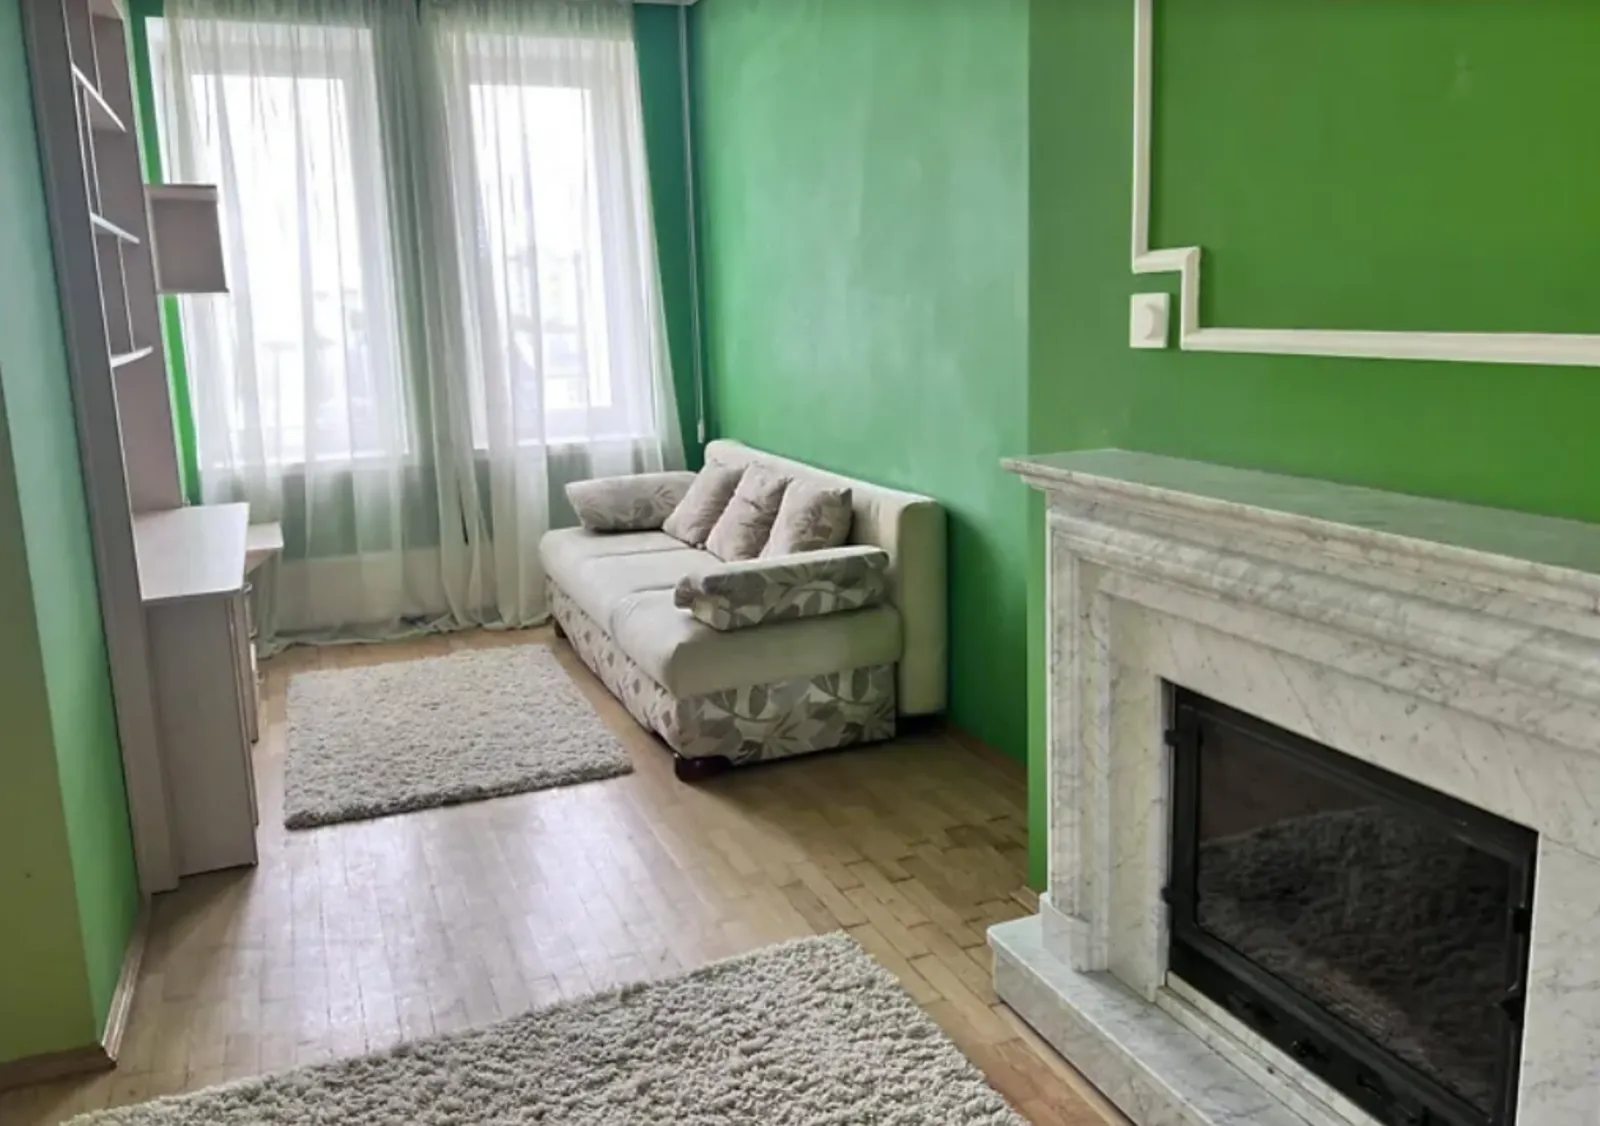 Apartment for rent. 3 rooms, 170 m², 6th floor/6 floors. Tsentr, Ternopil. 